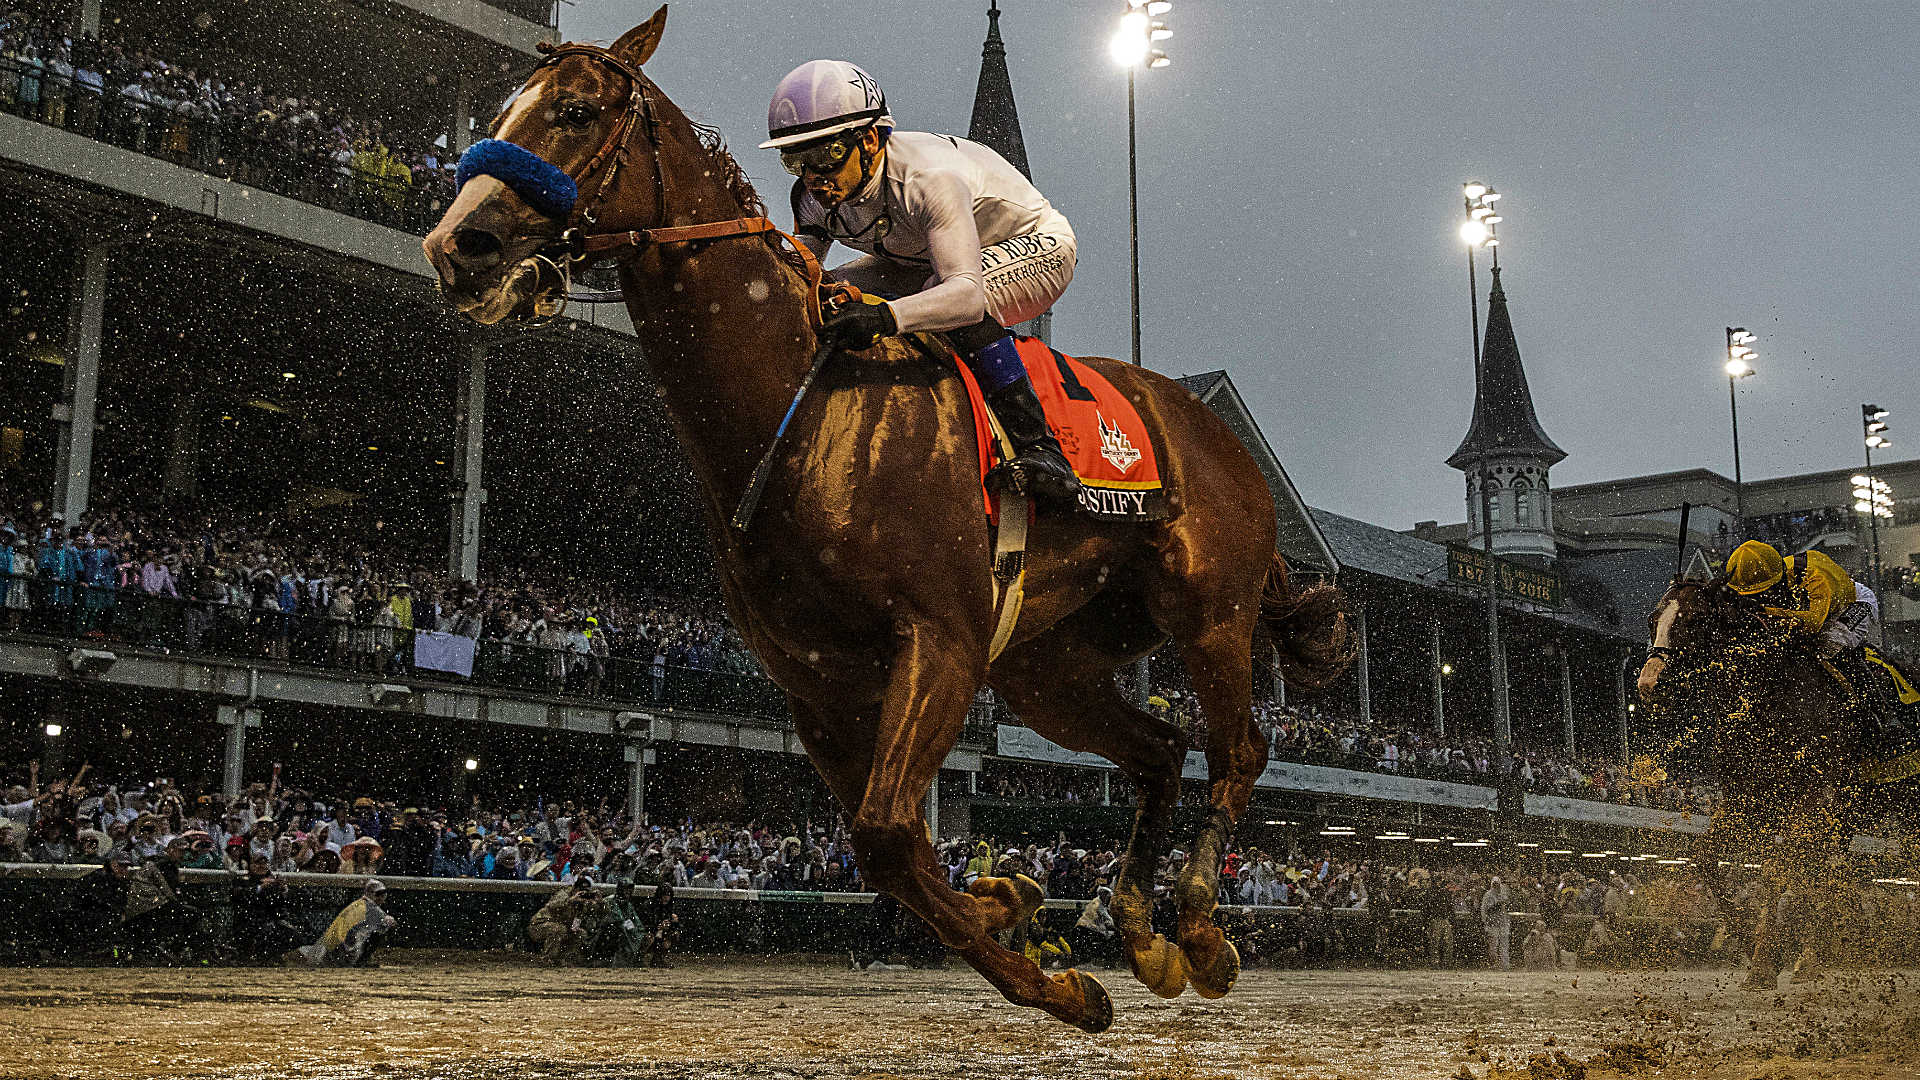 Who will win the preakness horse race 2020